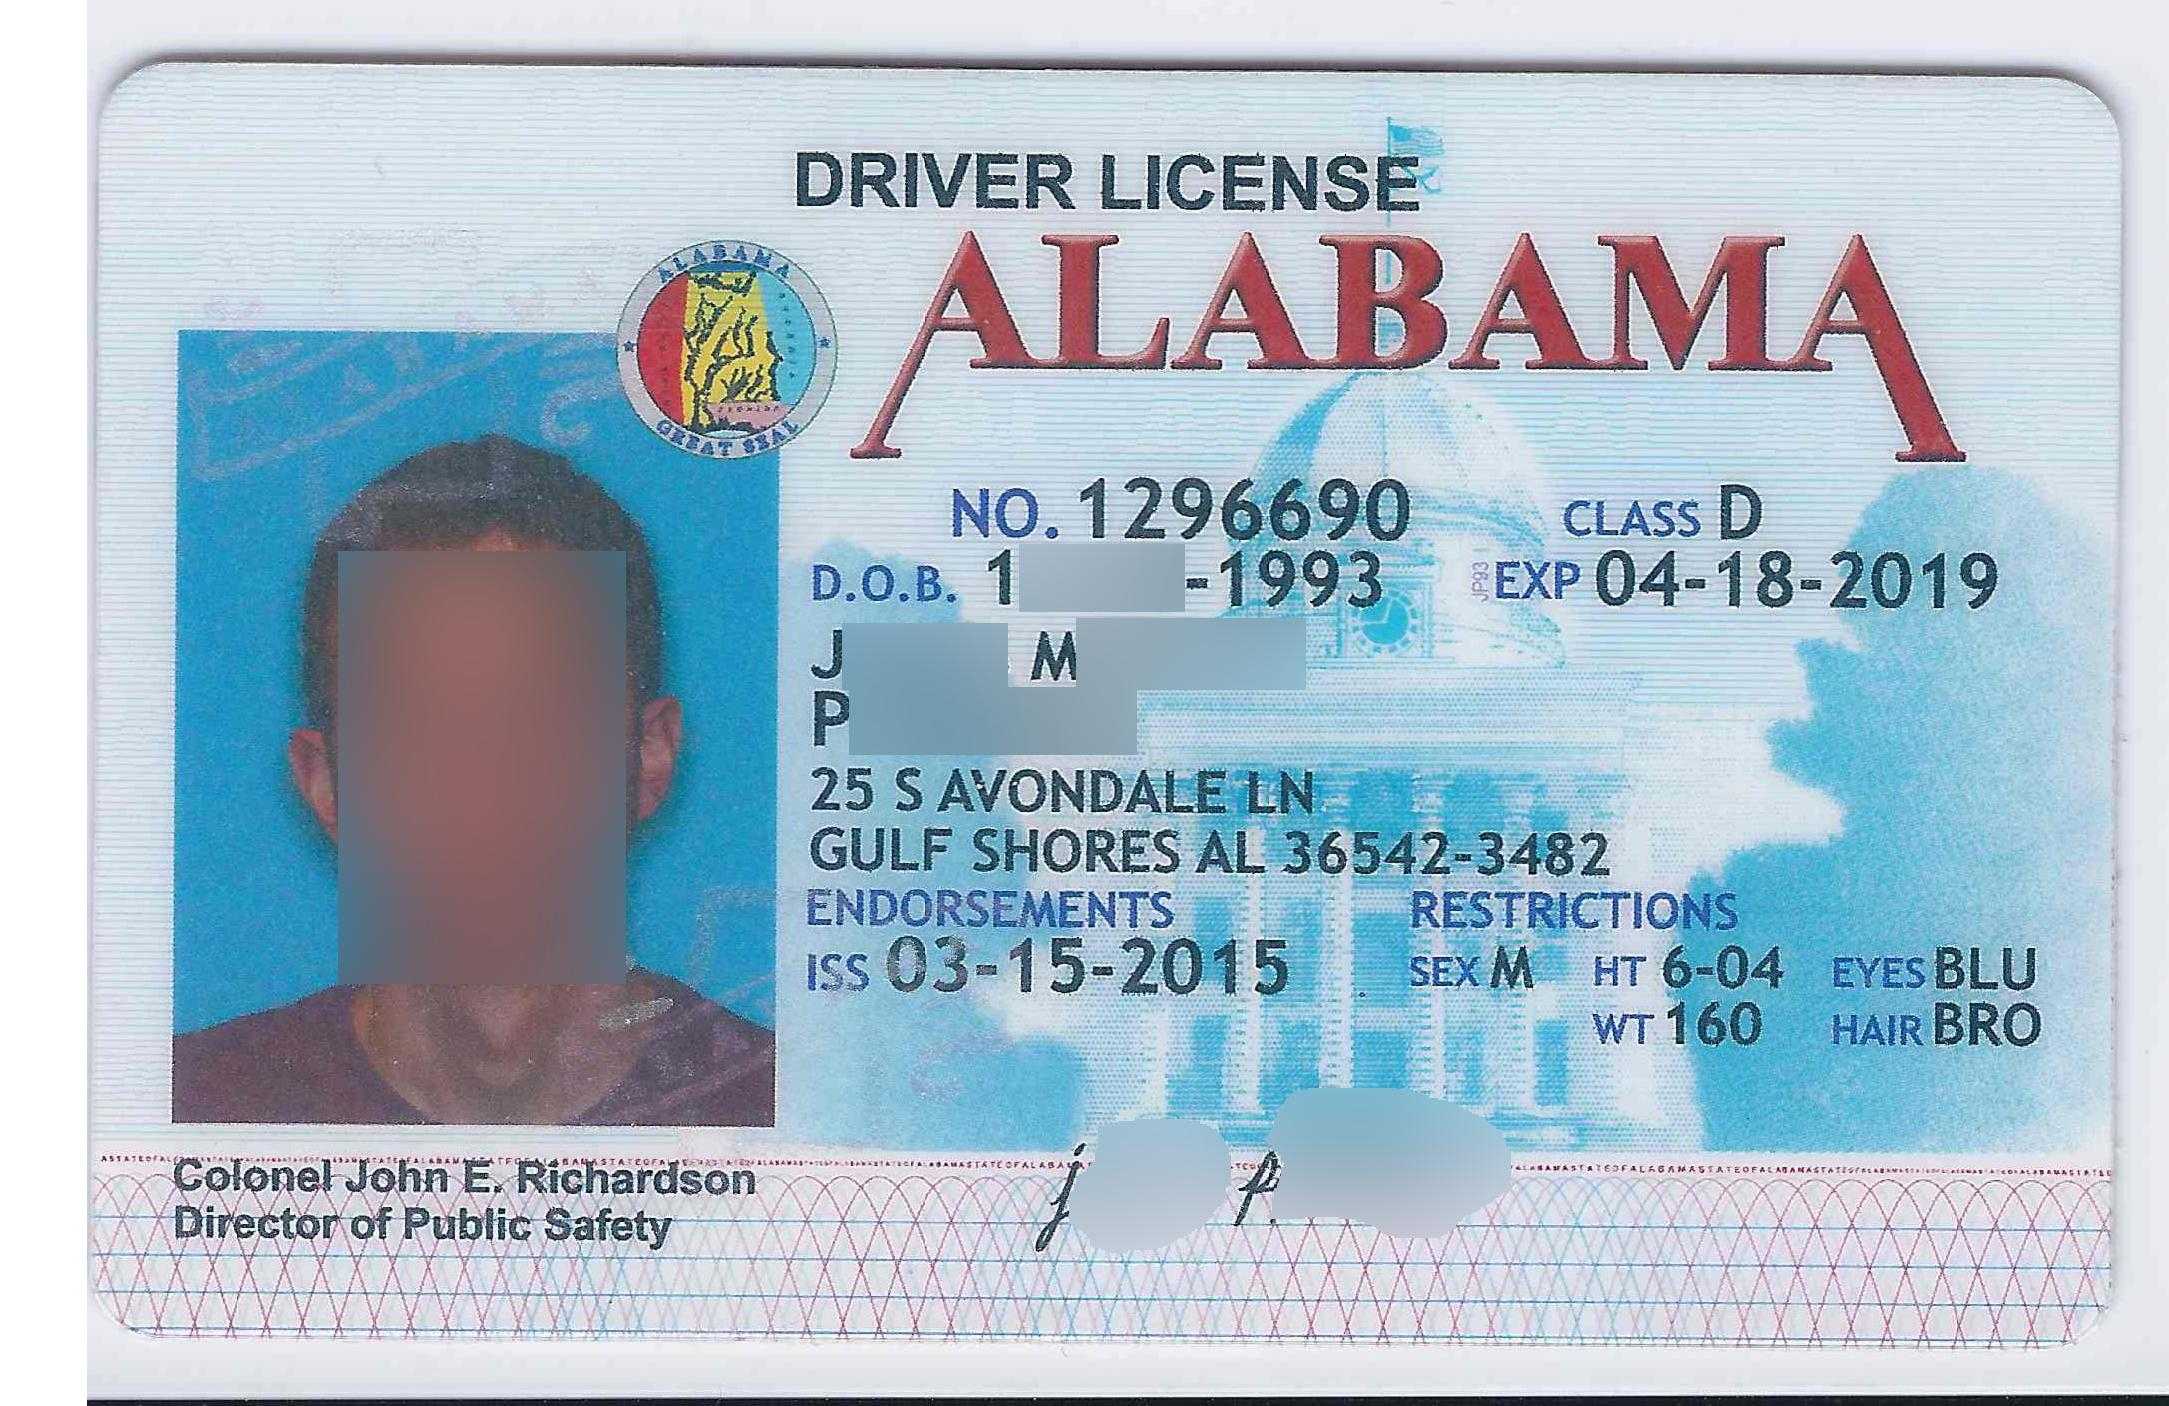 Drivers License Id Card Template